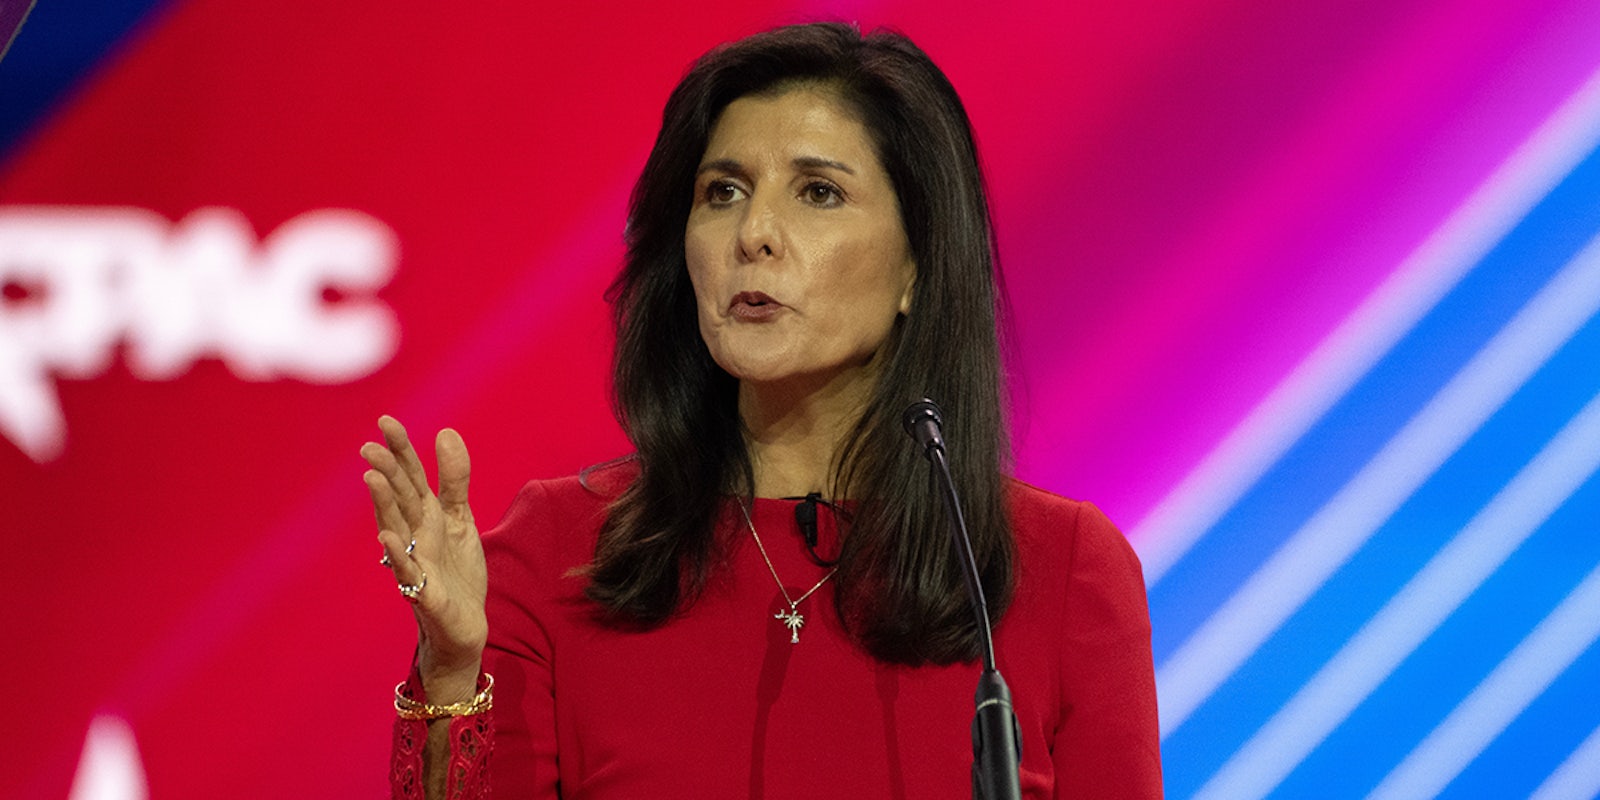 Nikki Haley speaking in front of red pink and blue background